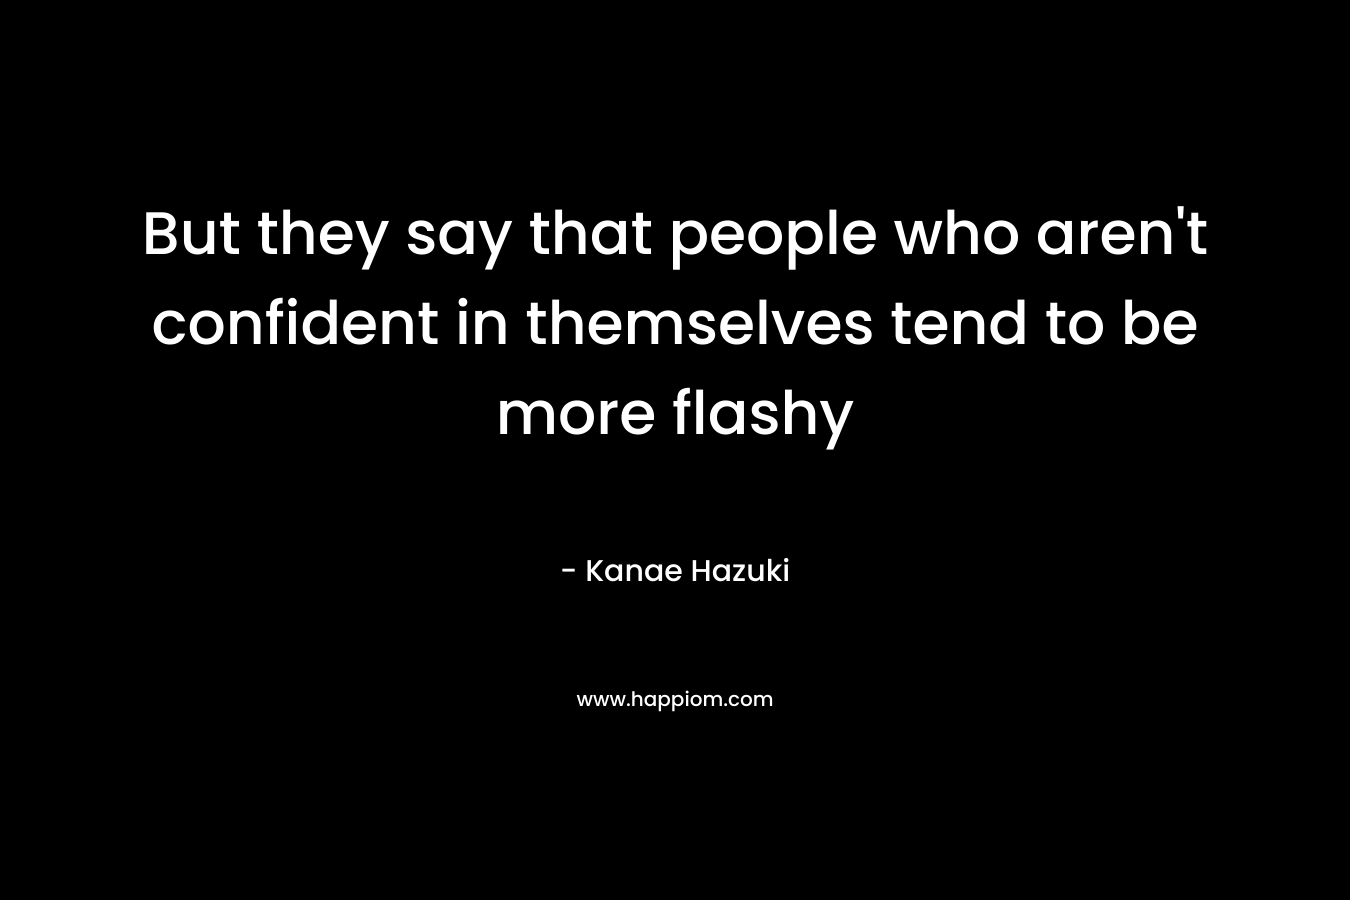 But they say that people who aren't confident in themselves tend to be more flashy